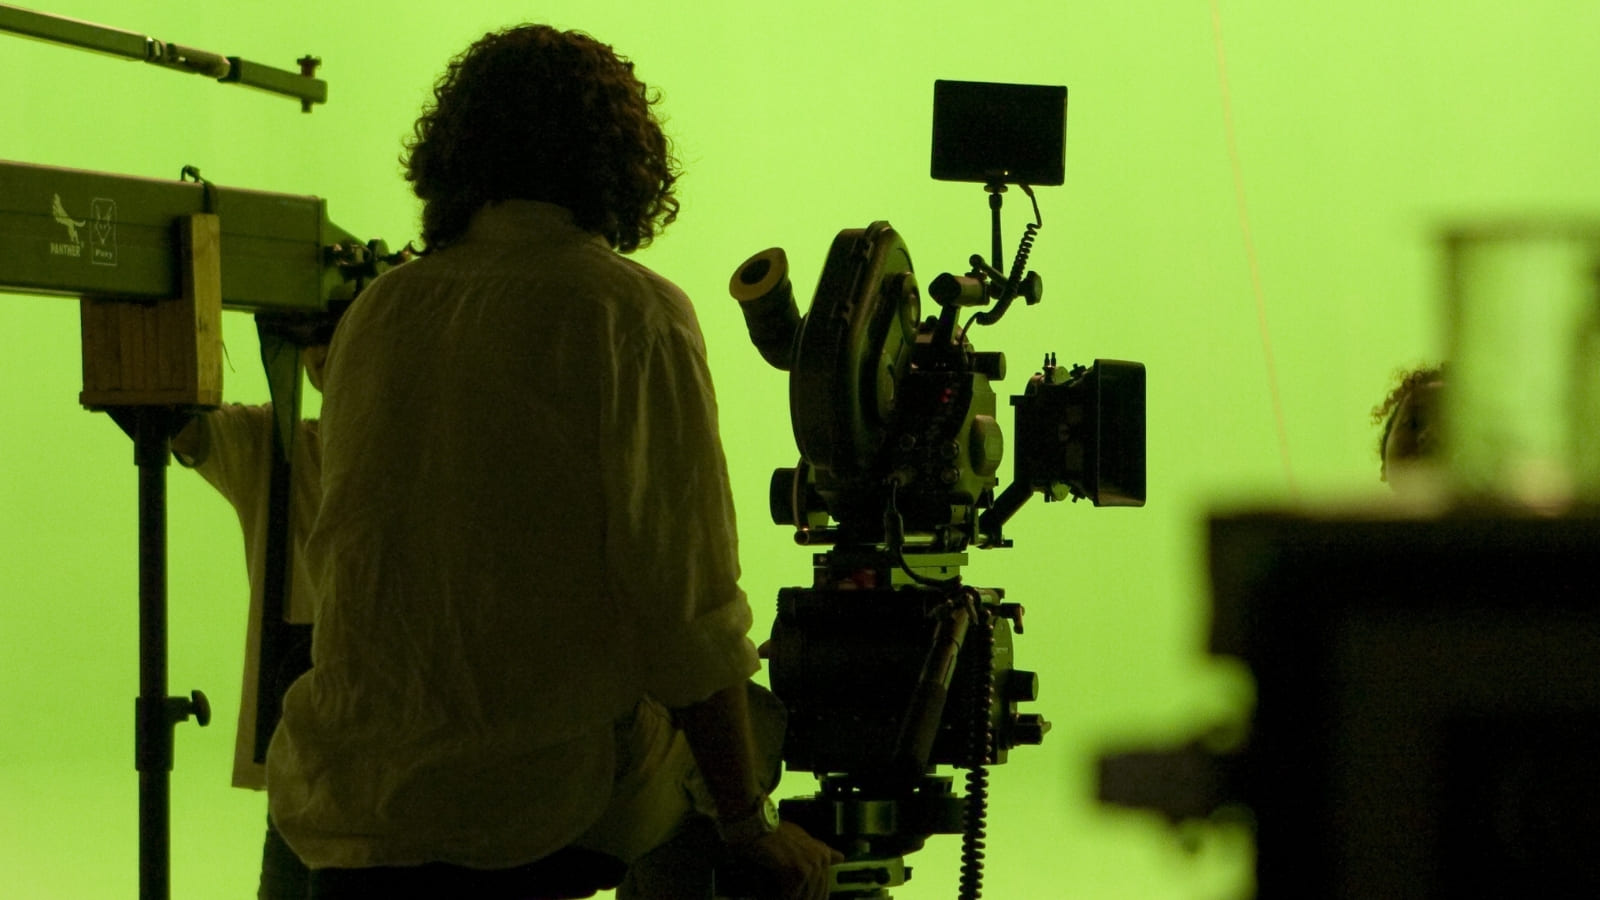 A camera operator sits in a green screen studio with a film camera set up